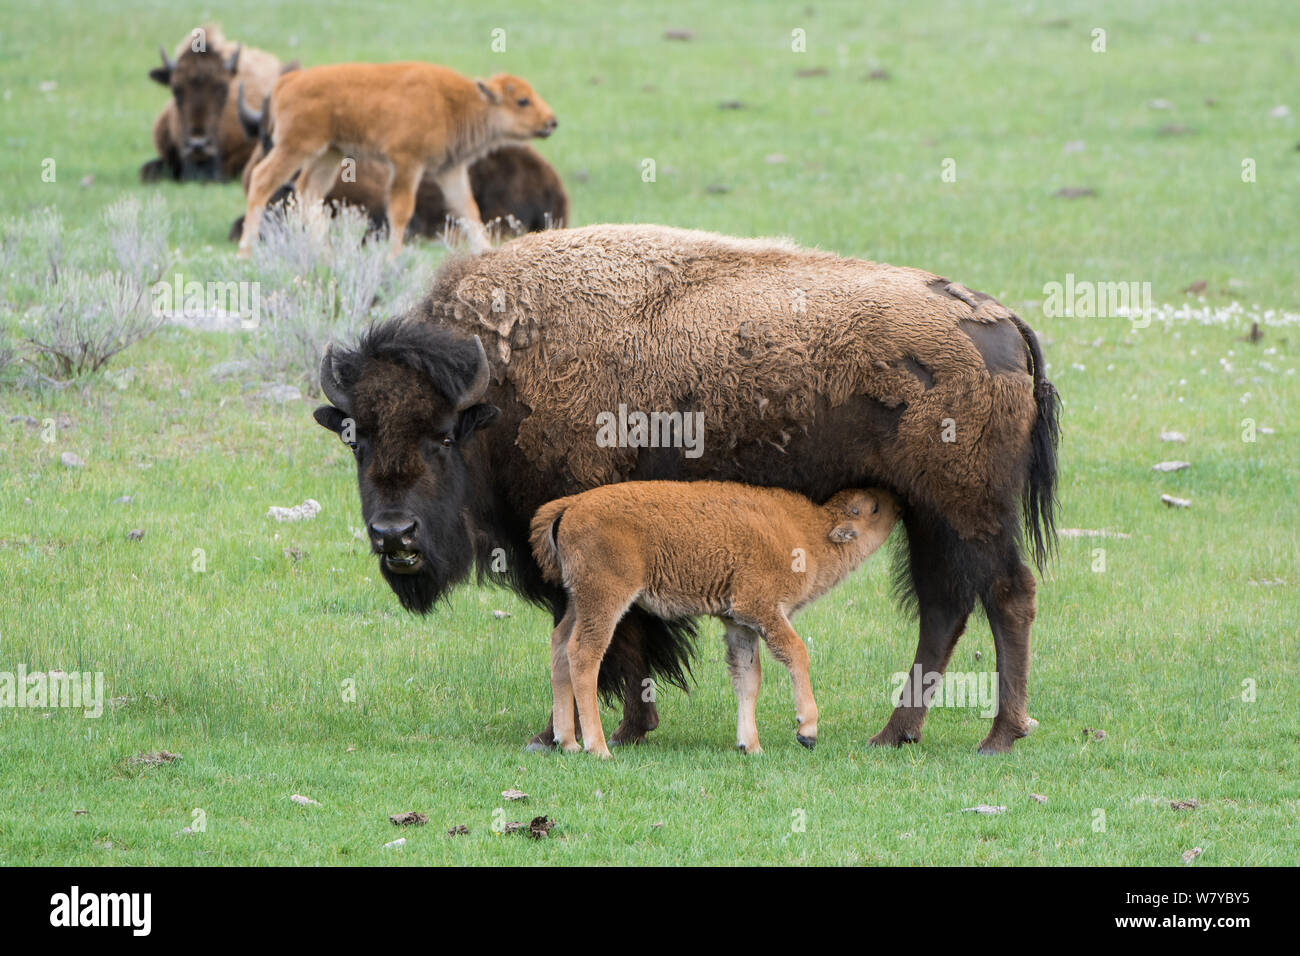 American Buffalo or Bison (Bison bison) calf suckling, Yellowstone National Park, Wyoming, USA, May Stock Photo